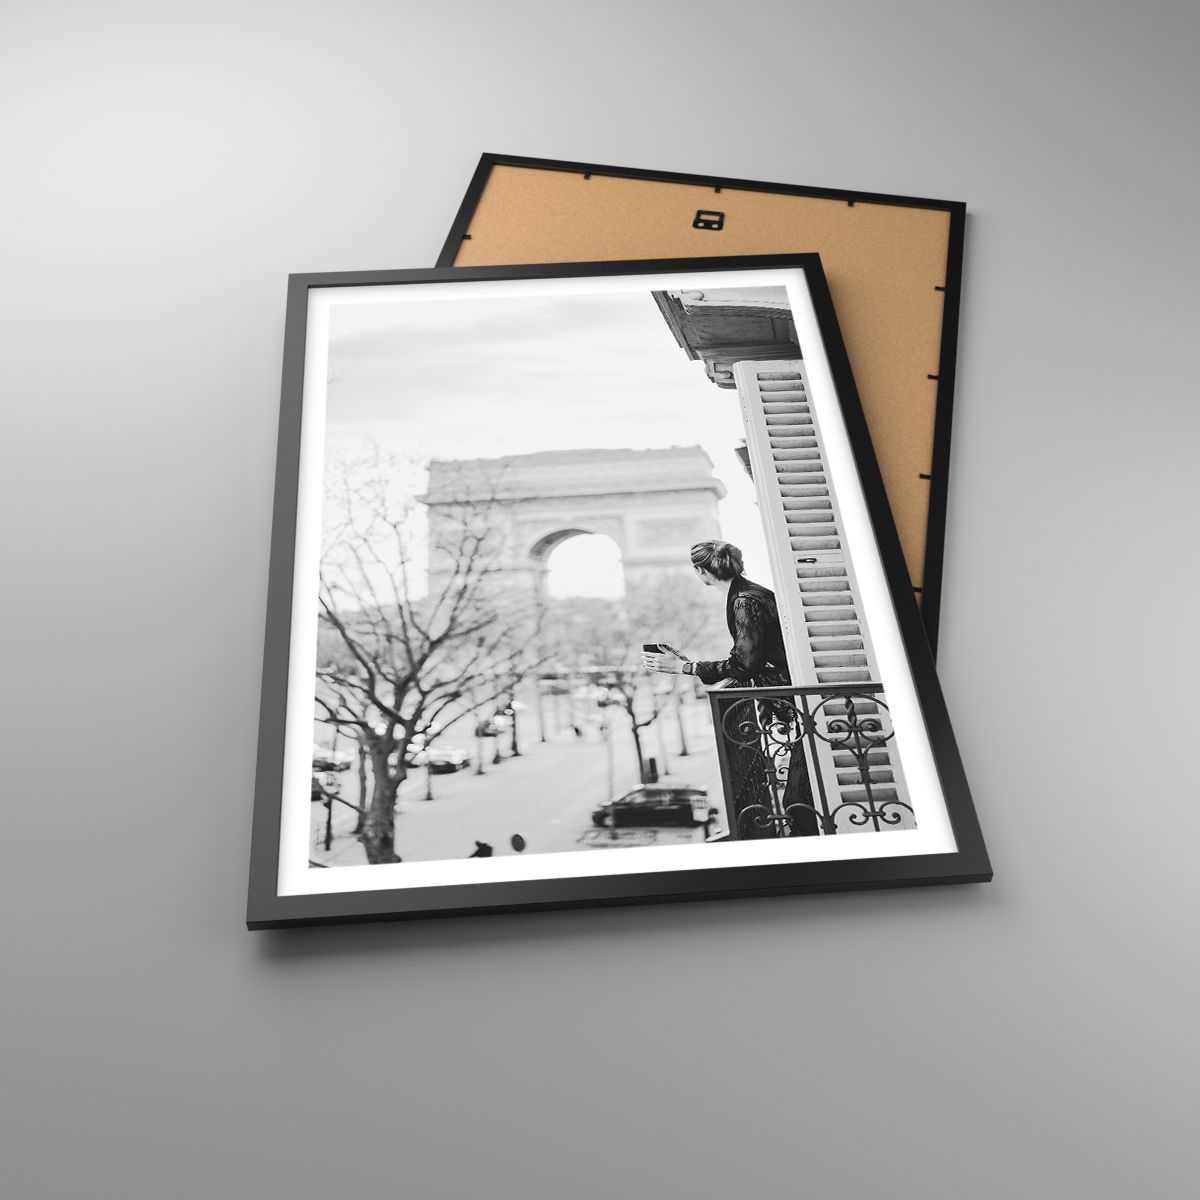 Poster Triumphal Arch, Poster Paris, Poster Architecture, Poster Woman, Poster Black And White